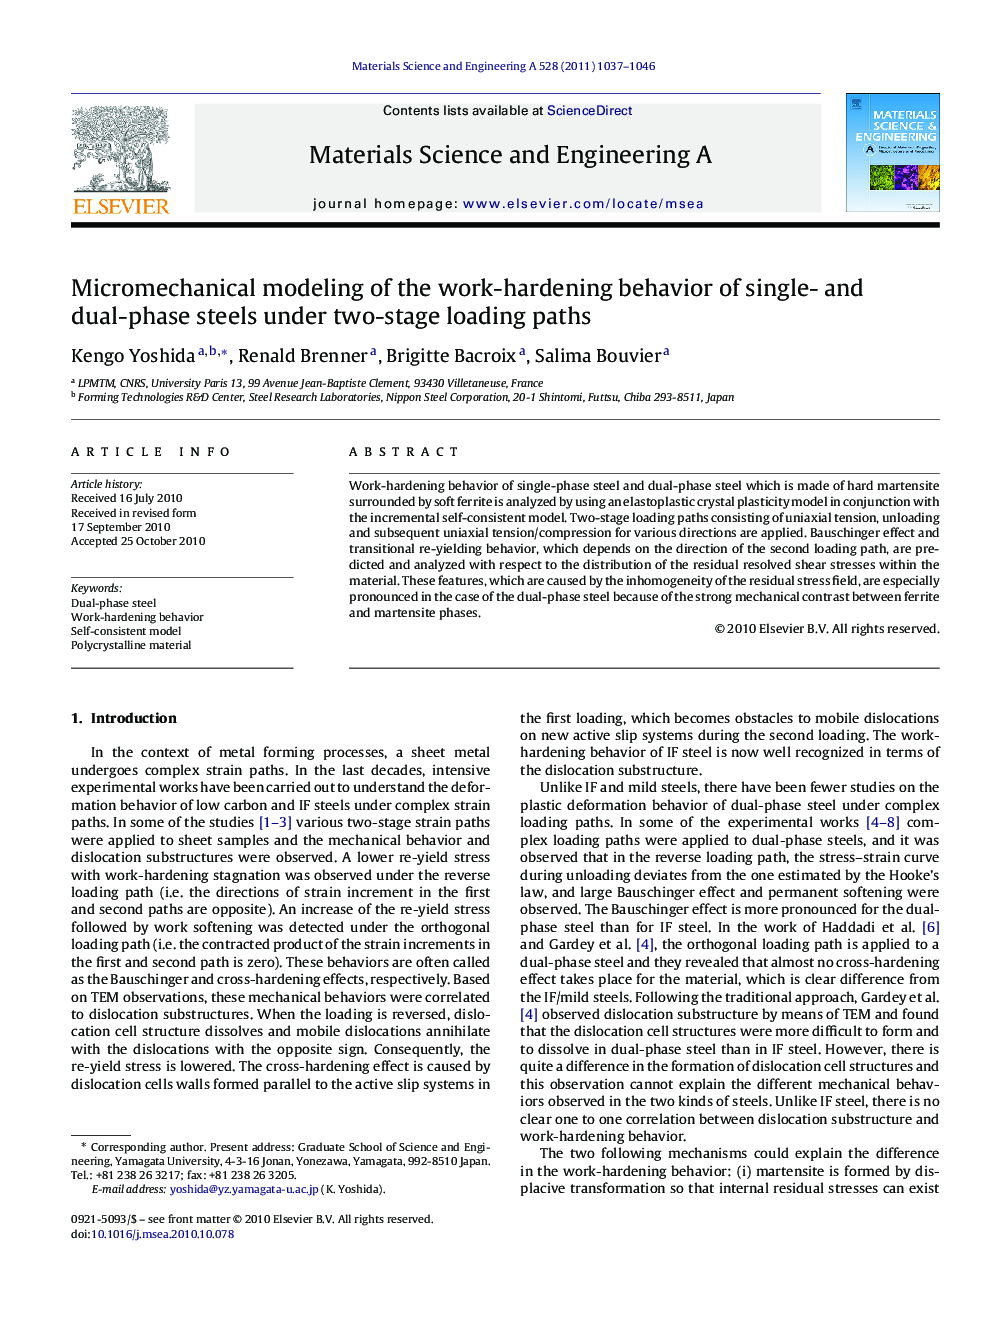 Micromechanical modeling of the work-hardening behavior of single- and dual-phase steels under two-stage loading paths